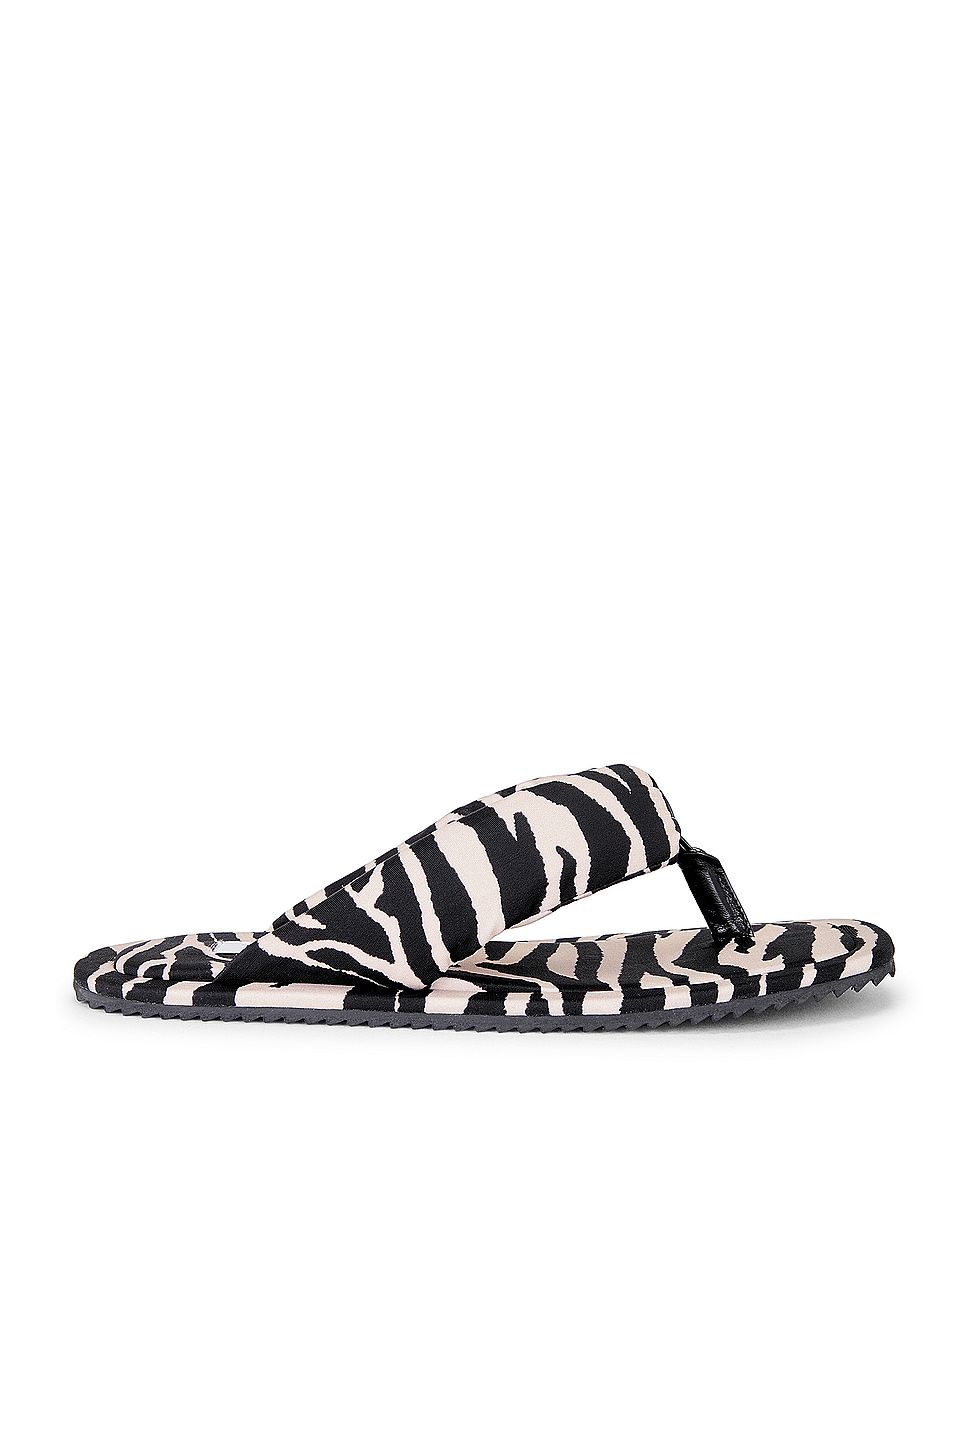 Image 1 of THE ATTICO Zebra Printed Indie Flat Thong Sandal in Cappuccino & Black